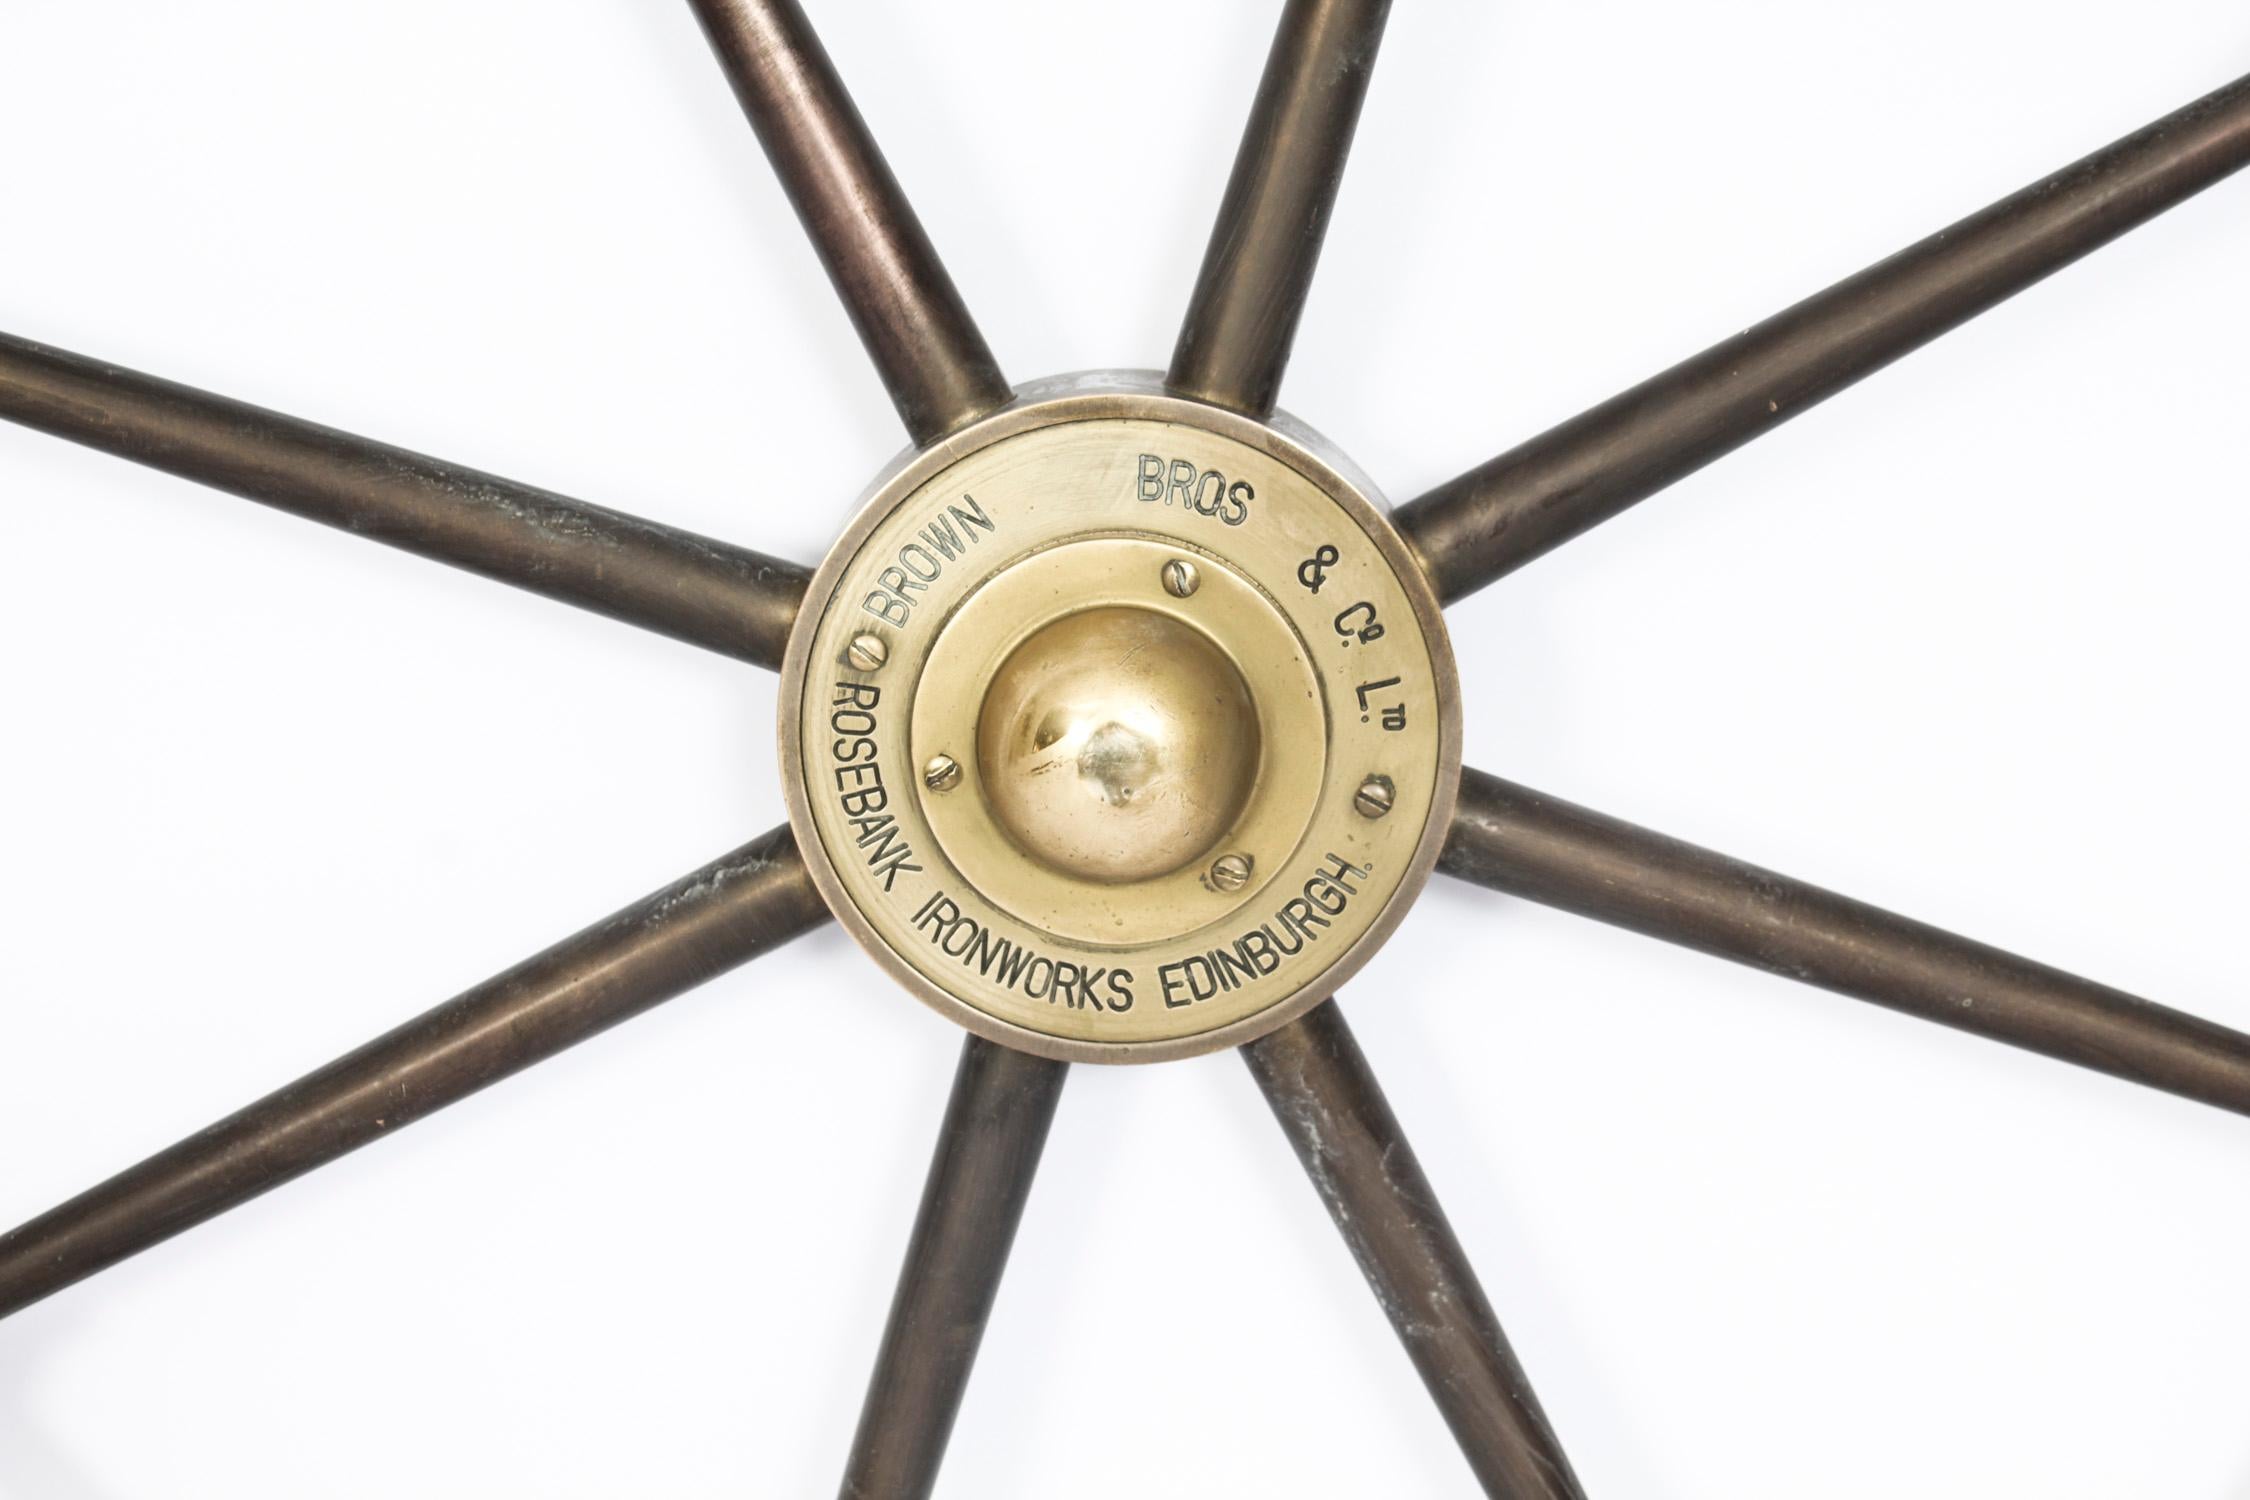 This is a superb early 20th century brass and walnut ships wheel by the renowned Scottish manufacturer, Brown Brothers and Co Ltd, Rosebank, Edinburgh, circa 1920 in date.
 
This exceptional nautical collectable features eight elegant turn king